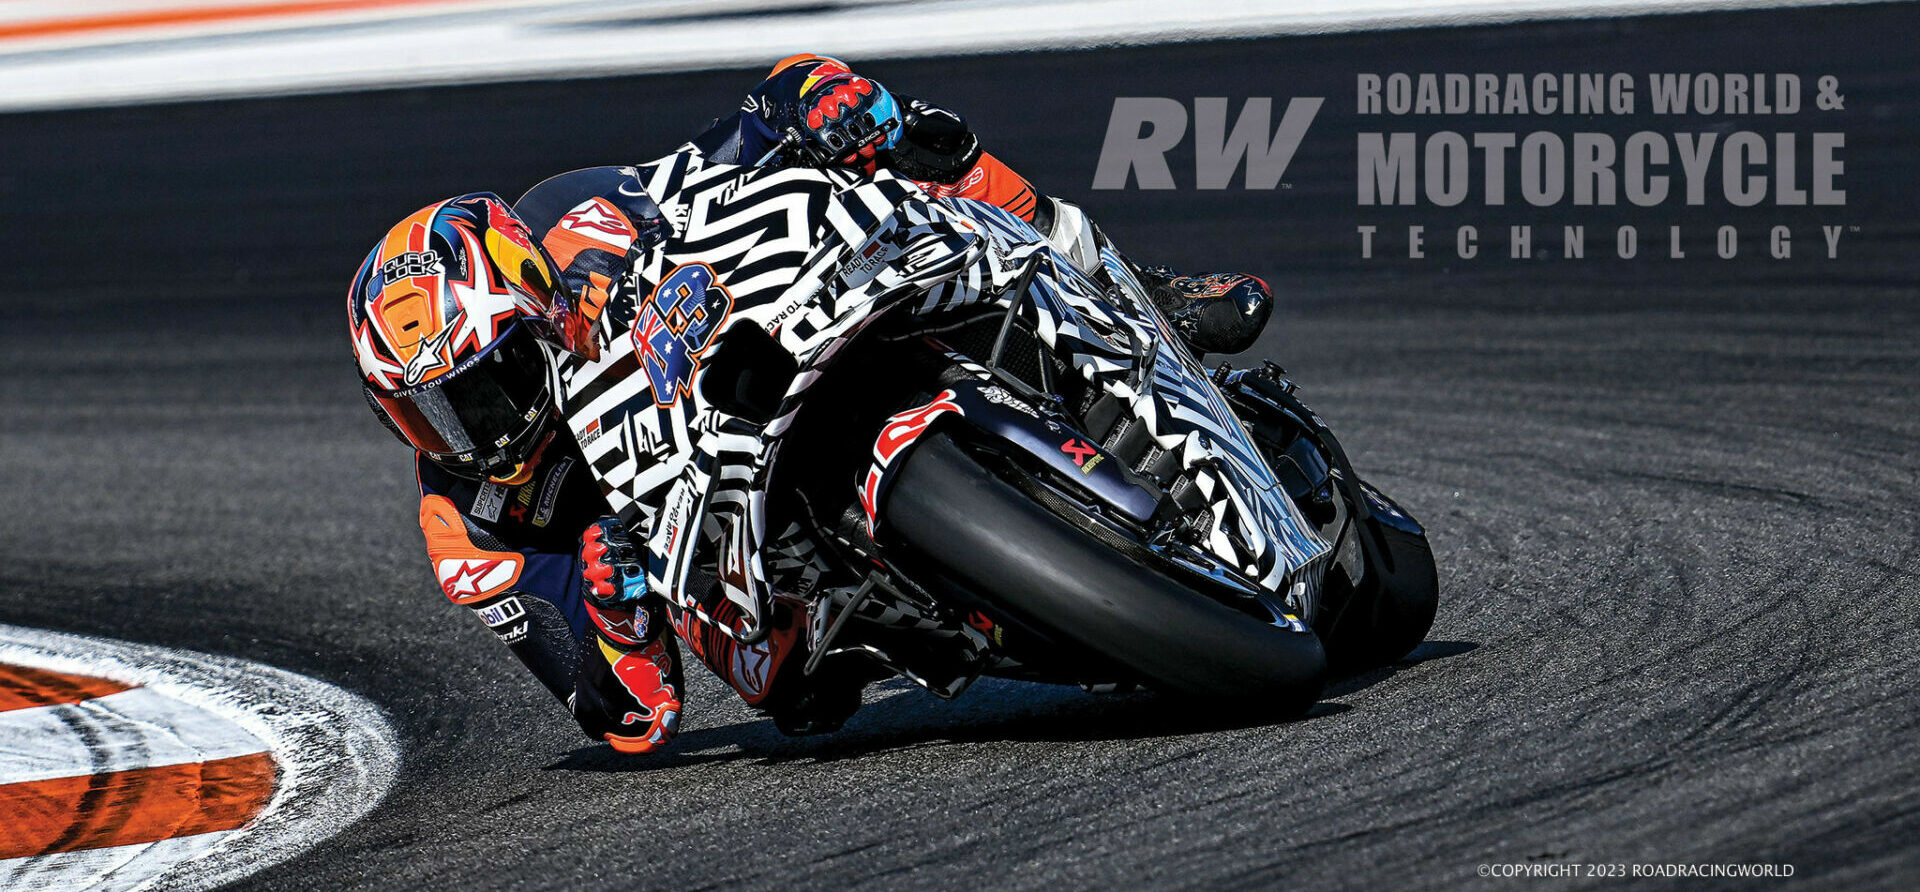 Jack Miller on a KTM RC16 with a carbon-fiber frame and camouflaged bodywork hiding experimental ground-effect aerodynamic devices on the upper fairing, in post-season testgin at Valencia. Photo by Gigi Soldano/DPPI Media.